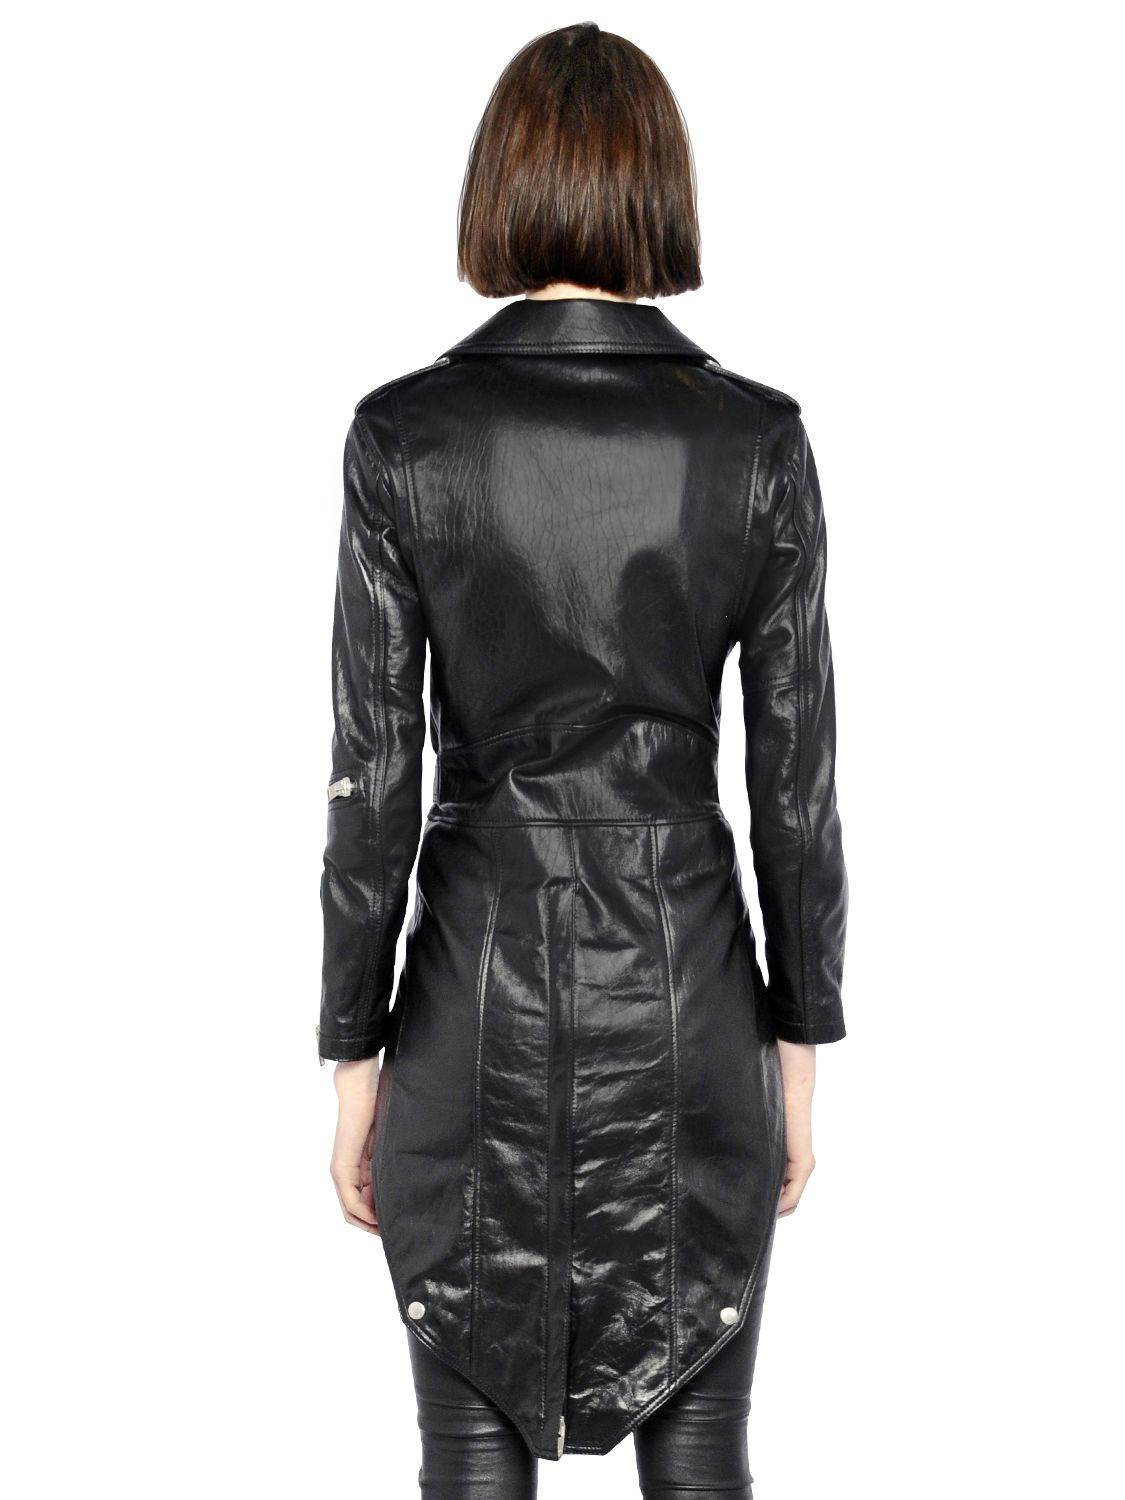 Saint laurent Nappa Leather Moto Jacket With Coattails in Black | Lyst